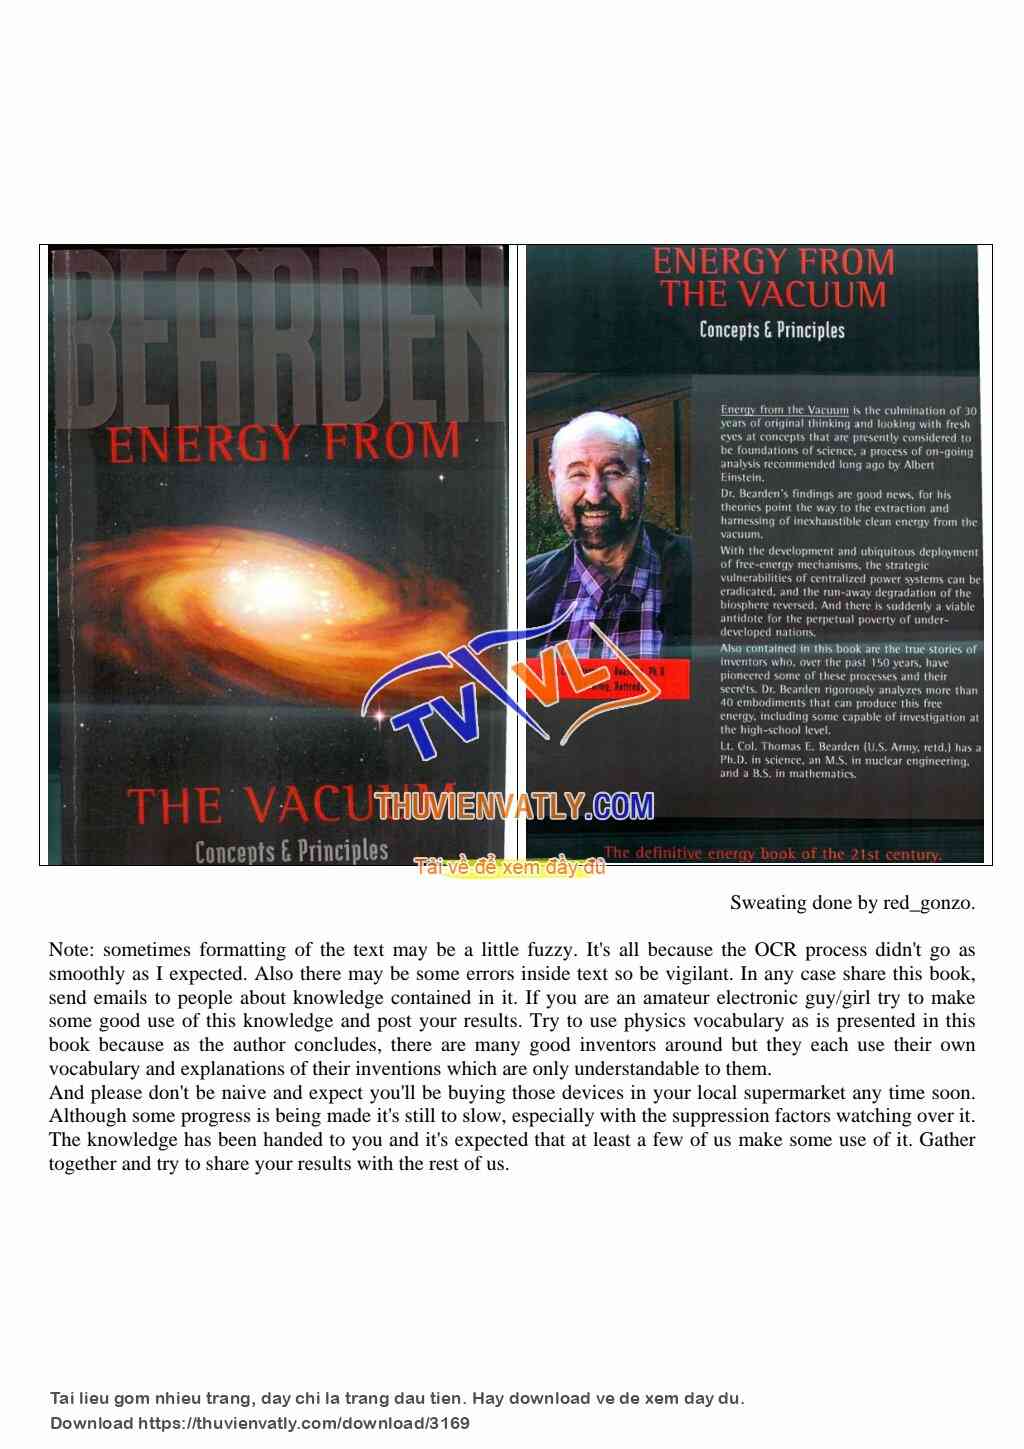 Energy from the vacuum: Concepts and Principles